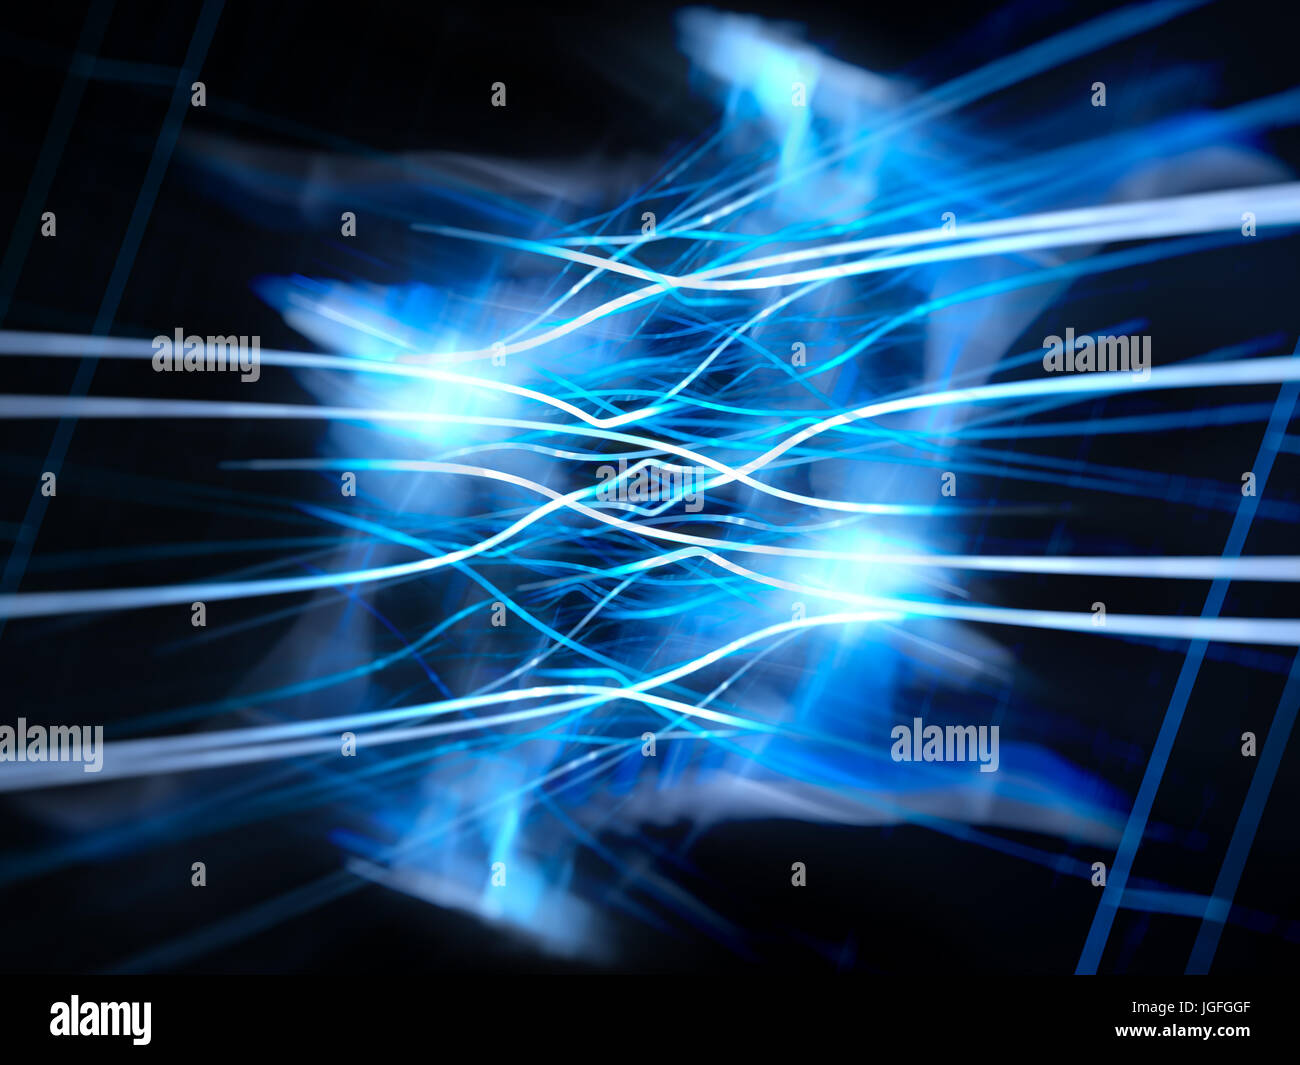 Blue glowing connected fiber optic curves, new innovated technology, computer generated abstract background. 3D rendering Stock Photo